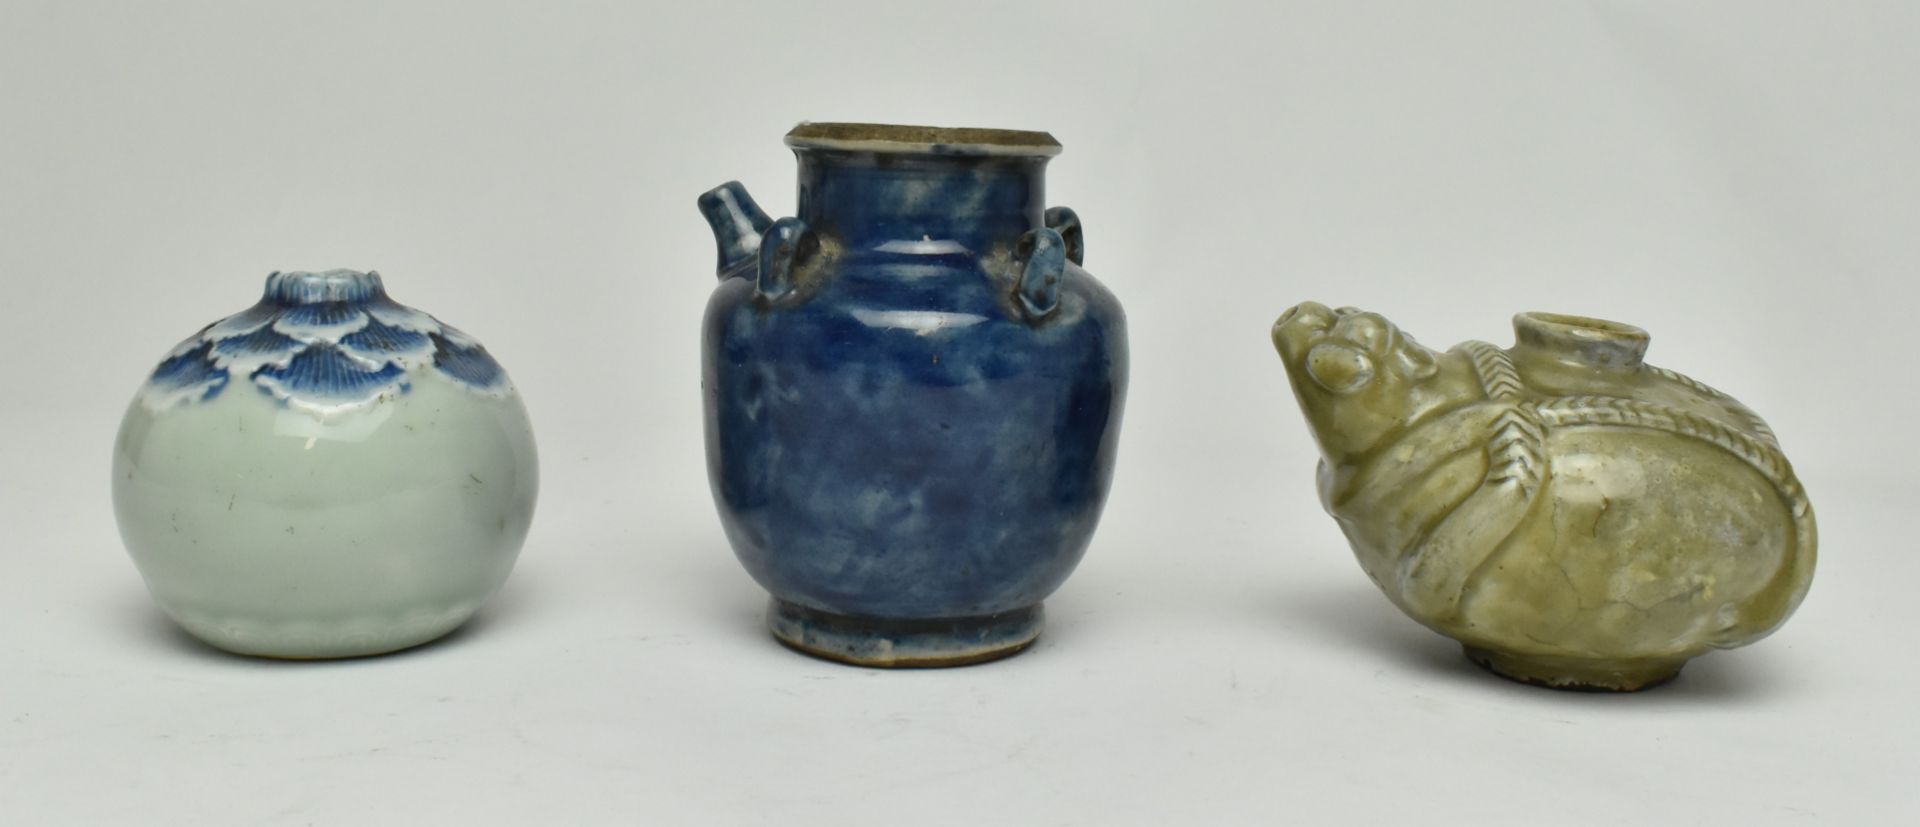 THREE QING DYNASTY AND LATER WATER DROPPER POT 清和以后水滴三个